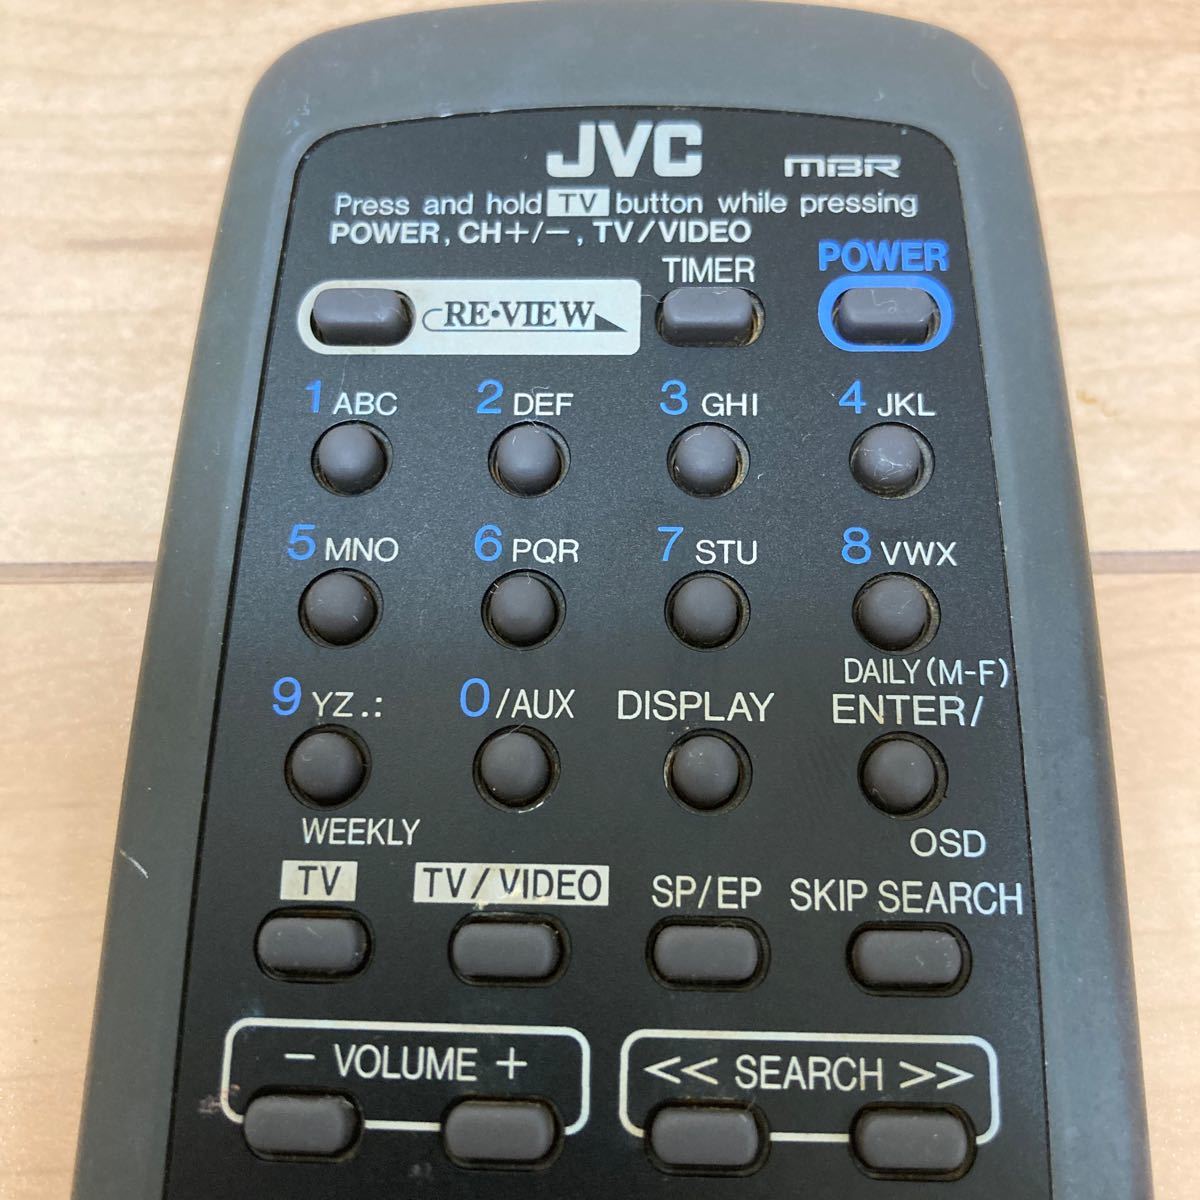 JVC PQ21674A-1 MBR TV PQ21674A リモートコントローラー　リモコン_画像3